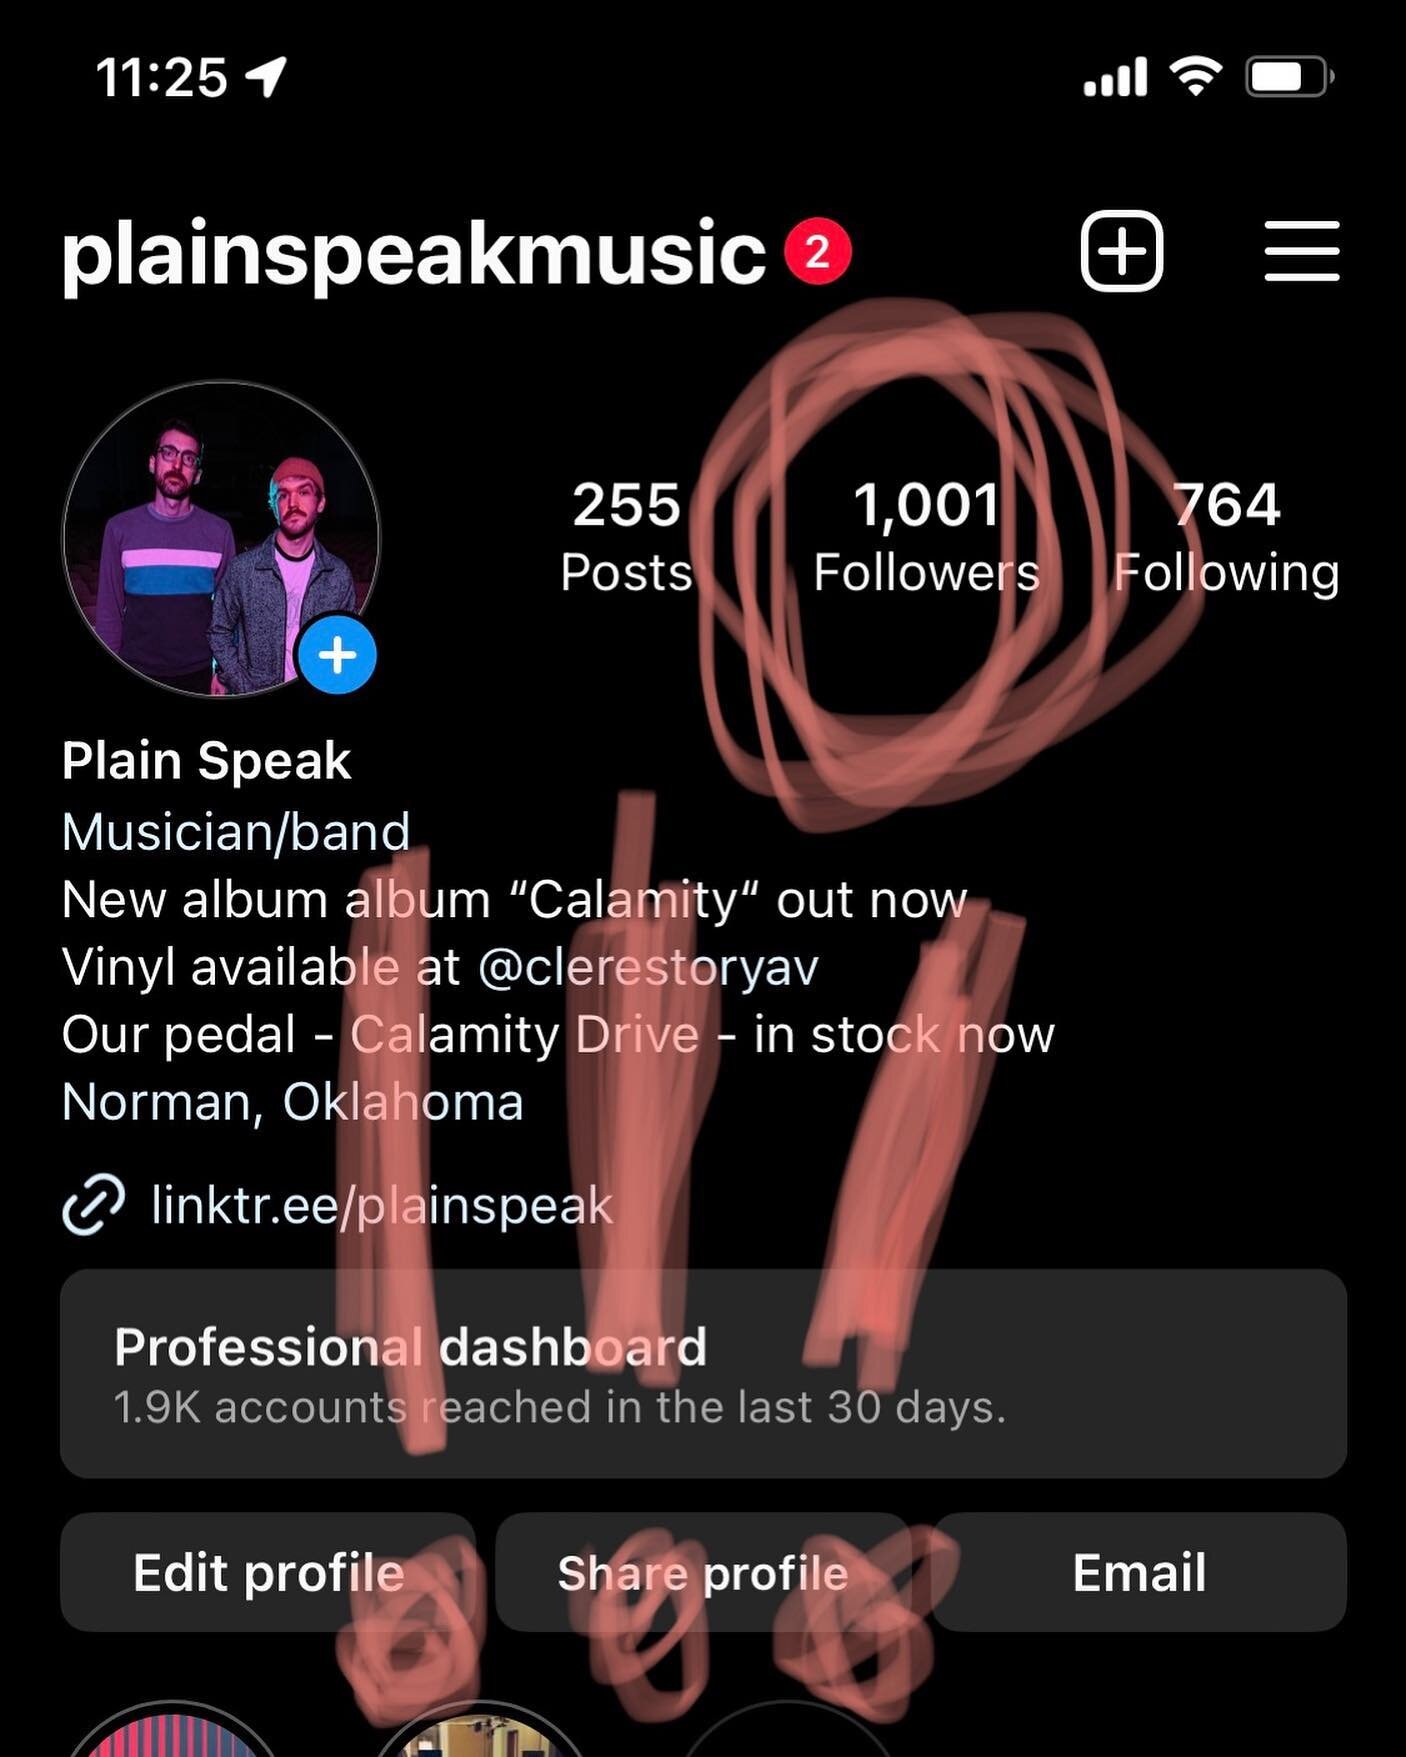 We surpassed a thousand followers!
It&rsquo;s been almost a month since &ldquo;Calamity&rdquo; was released and we&rsquo;re so happy to have you all here.

Keep streaming the new album, preorder one of our new shirts and we&rsquo;ve got some more exc